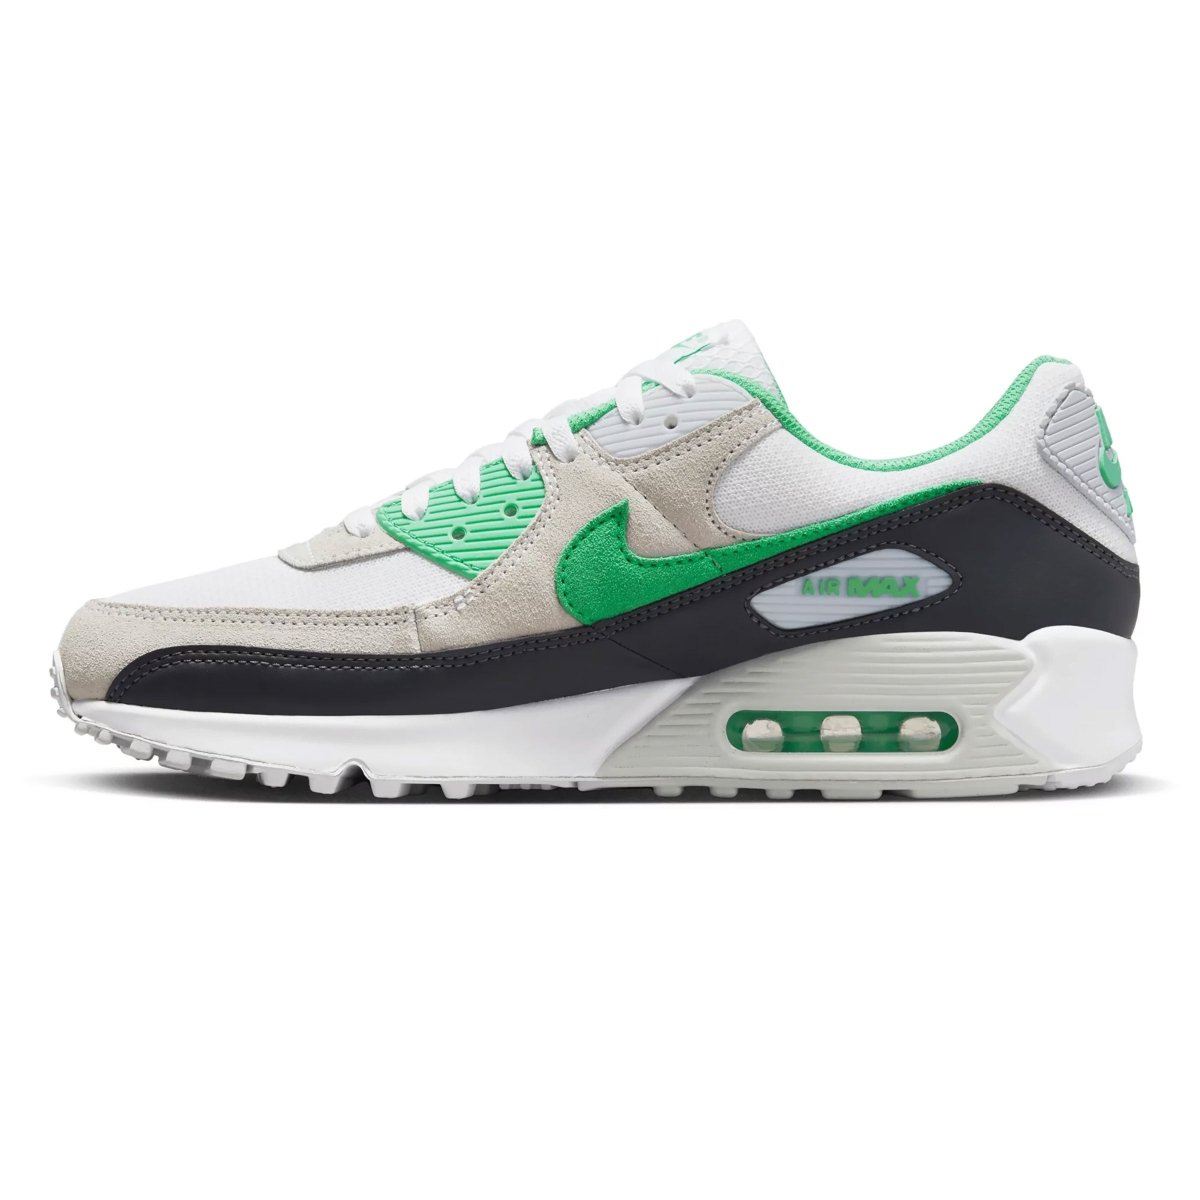 Nike Men's Air Max 90 White/Green/Grey - 10029600 - West NYC